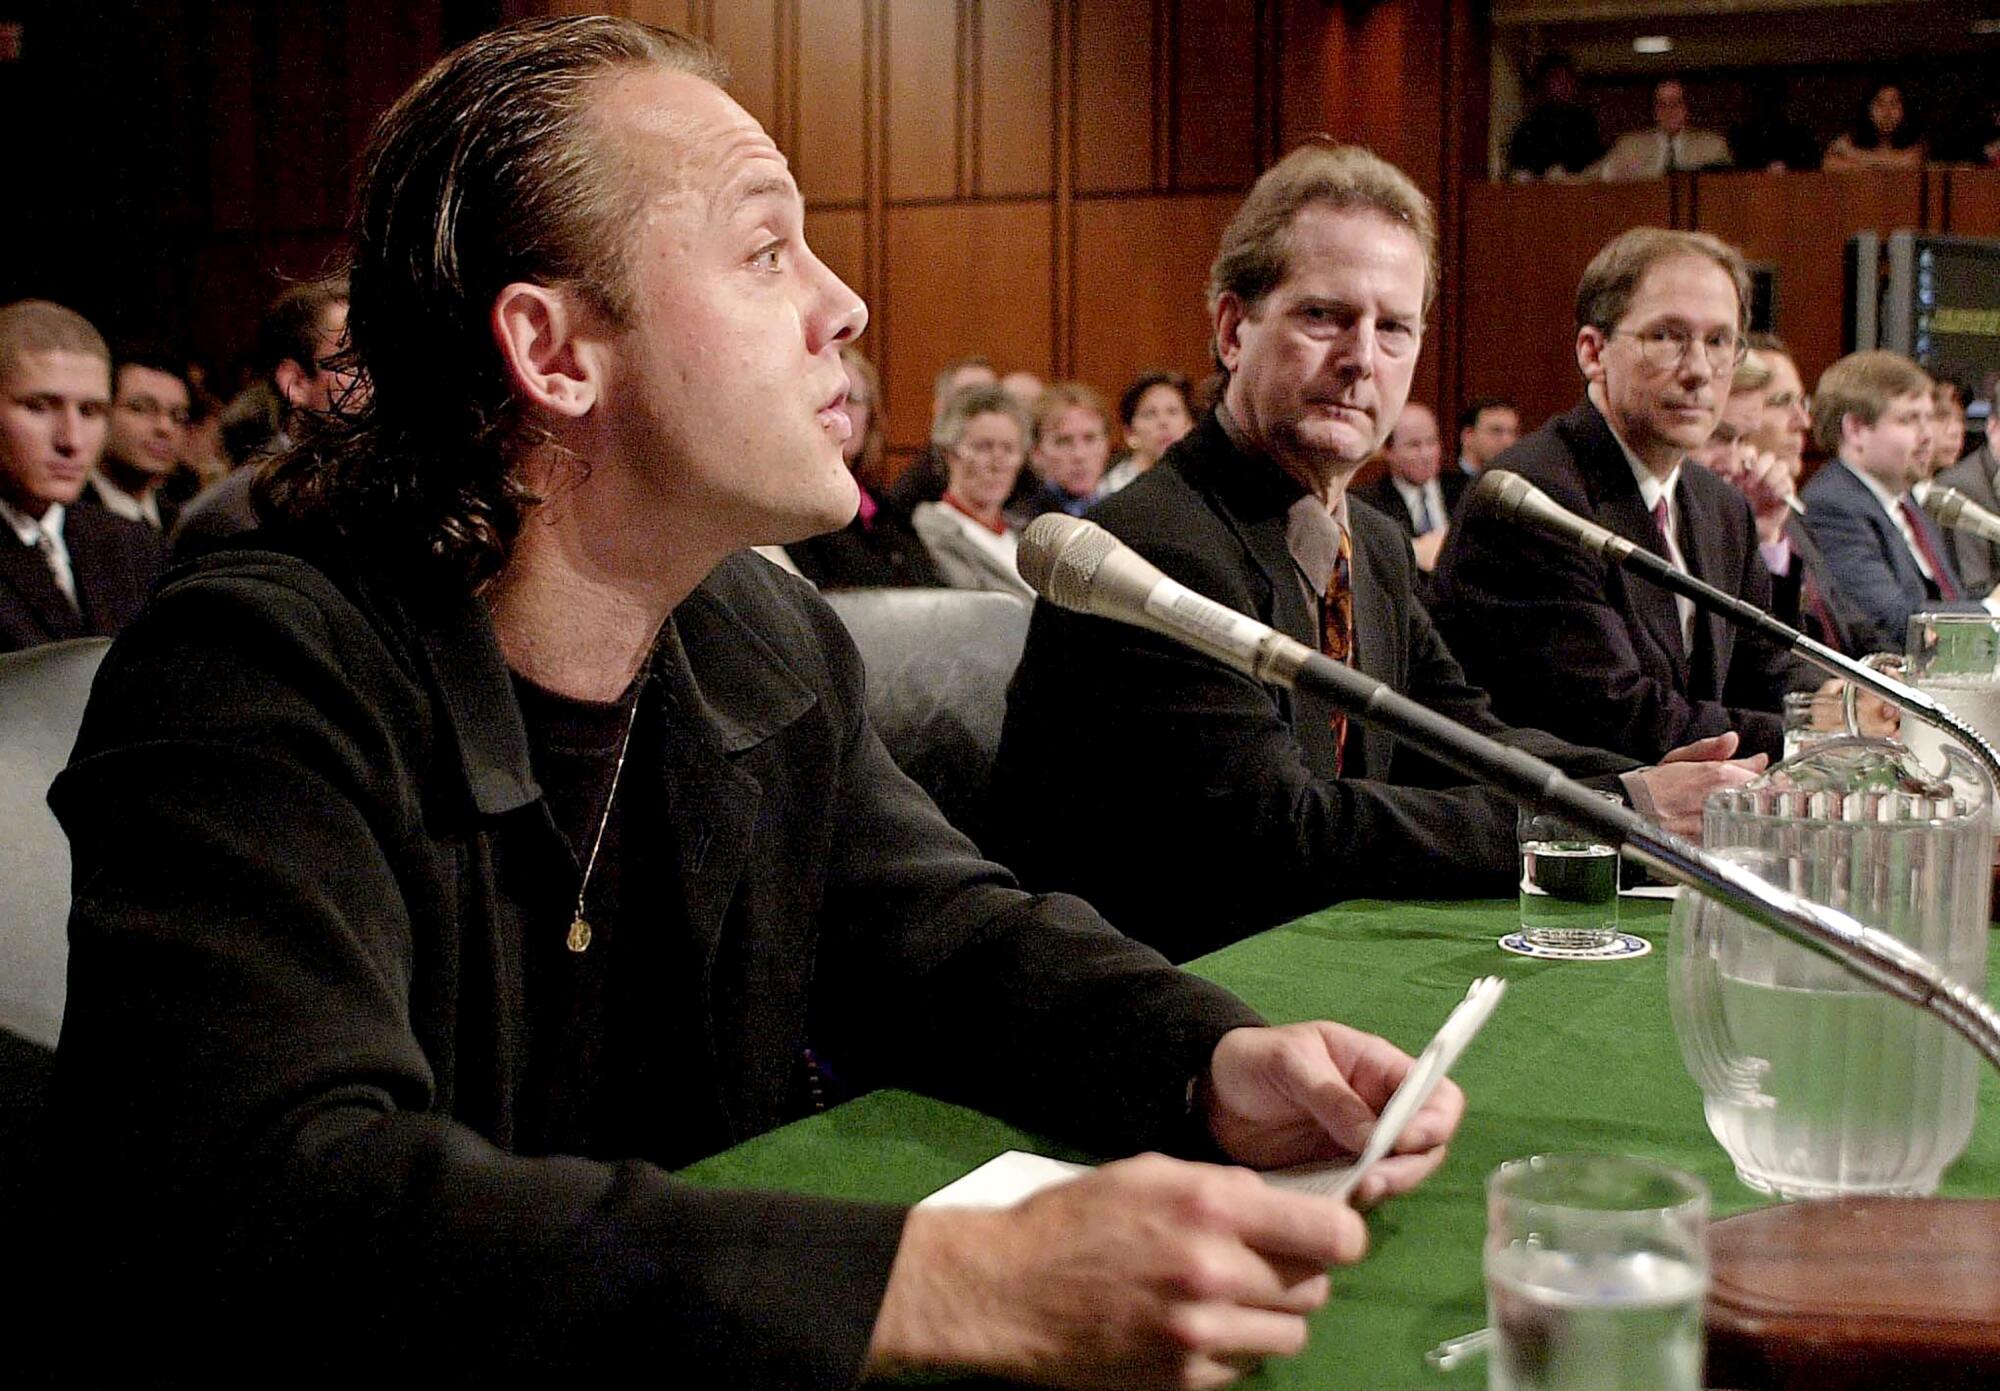 A man speaks into a microphone at a hearing as another man looks on.